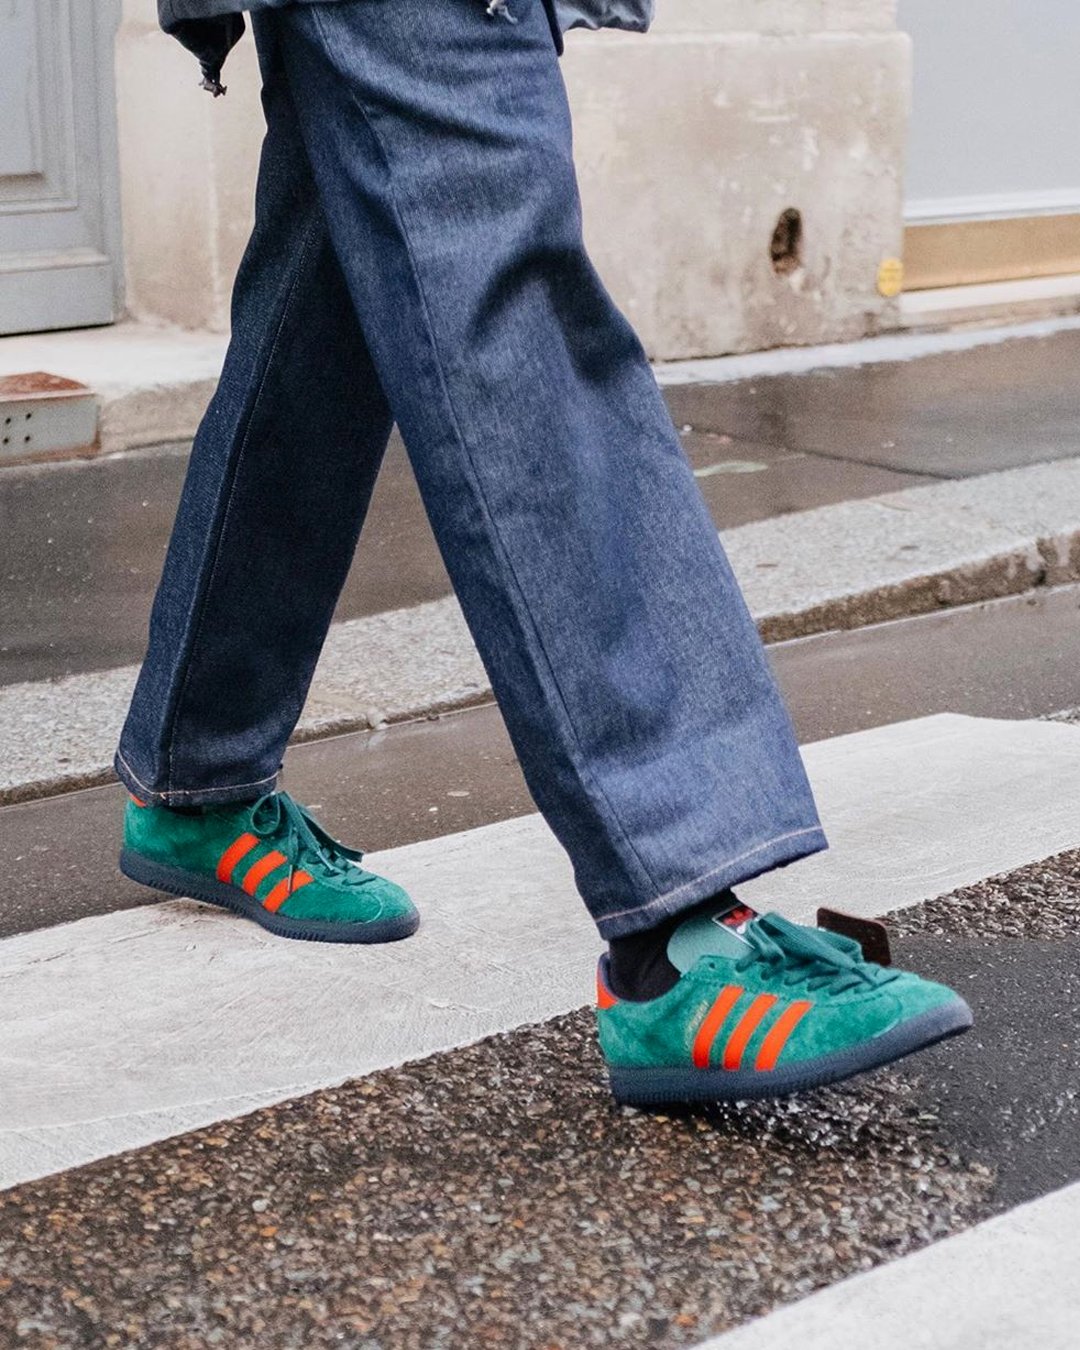 adidas alerts on "@sneakersnstuff Still available @sneakersnstuff. adidas Spezial Blackburn. Sold out on —&gt; https://t.co/MRLQvbIl3U #ad https://t.co/9UxGowygUQ" / Twitter